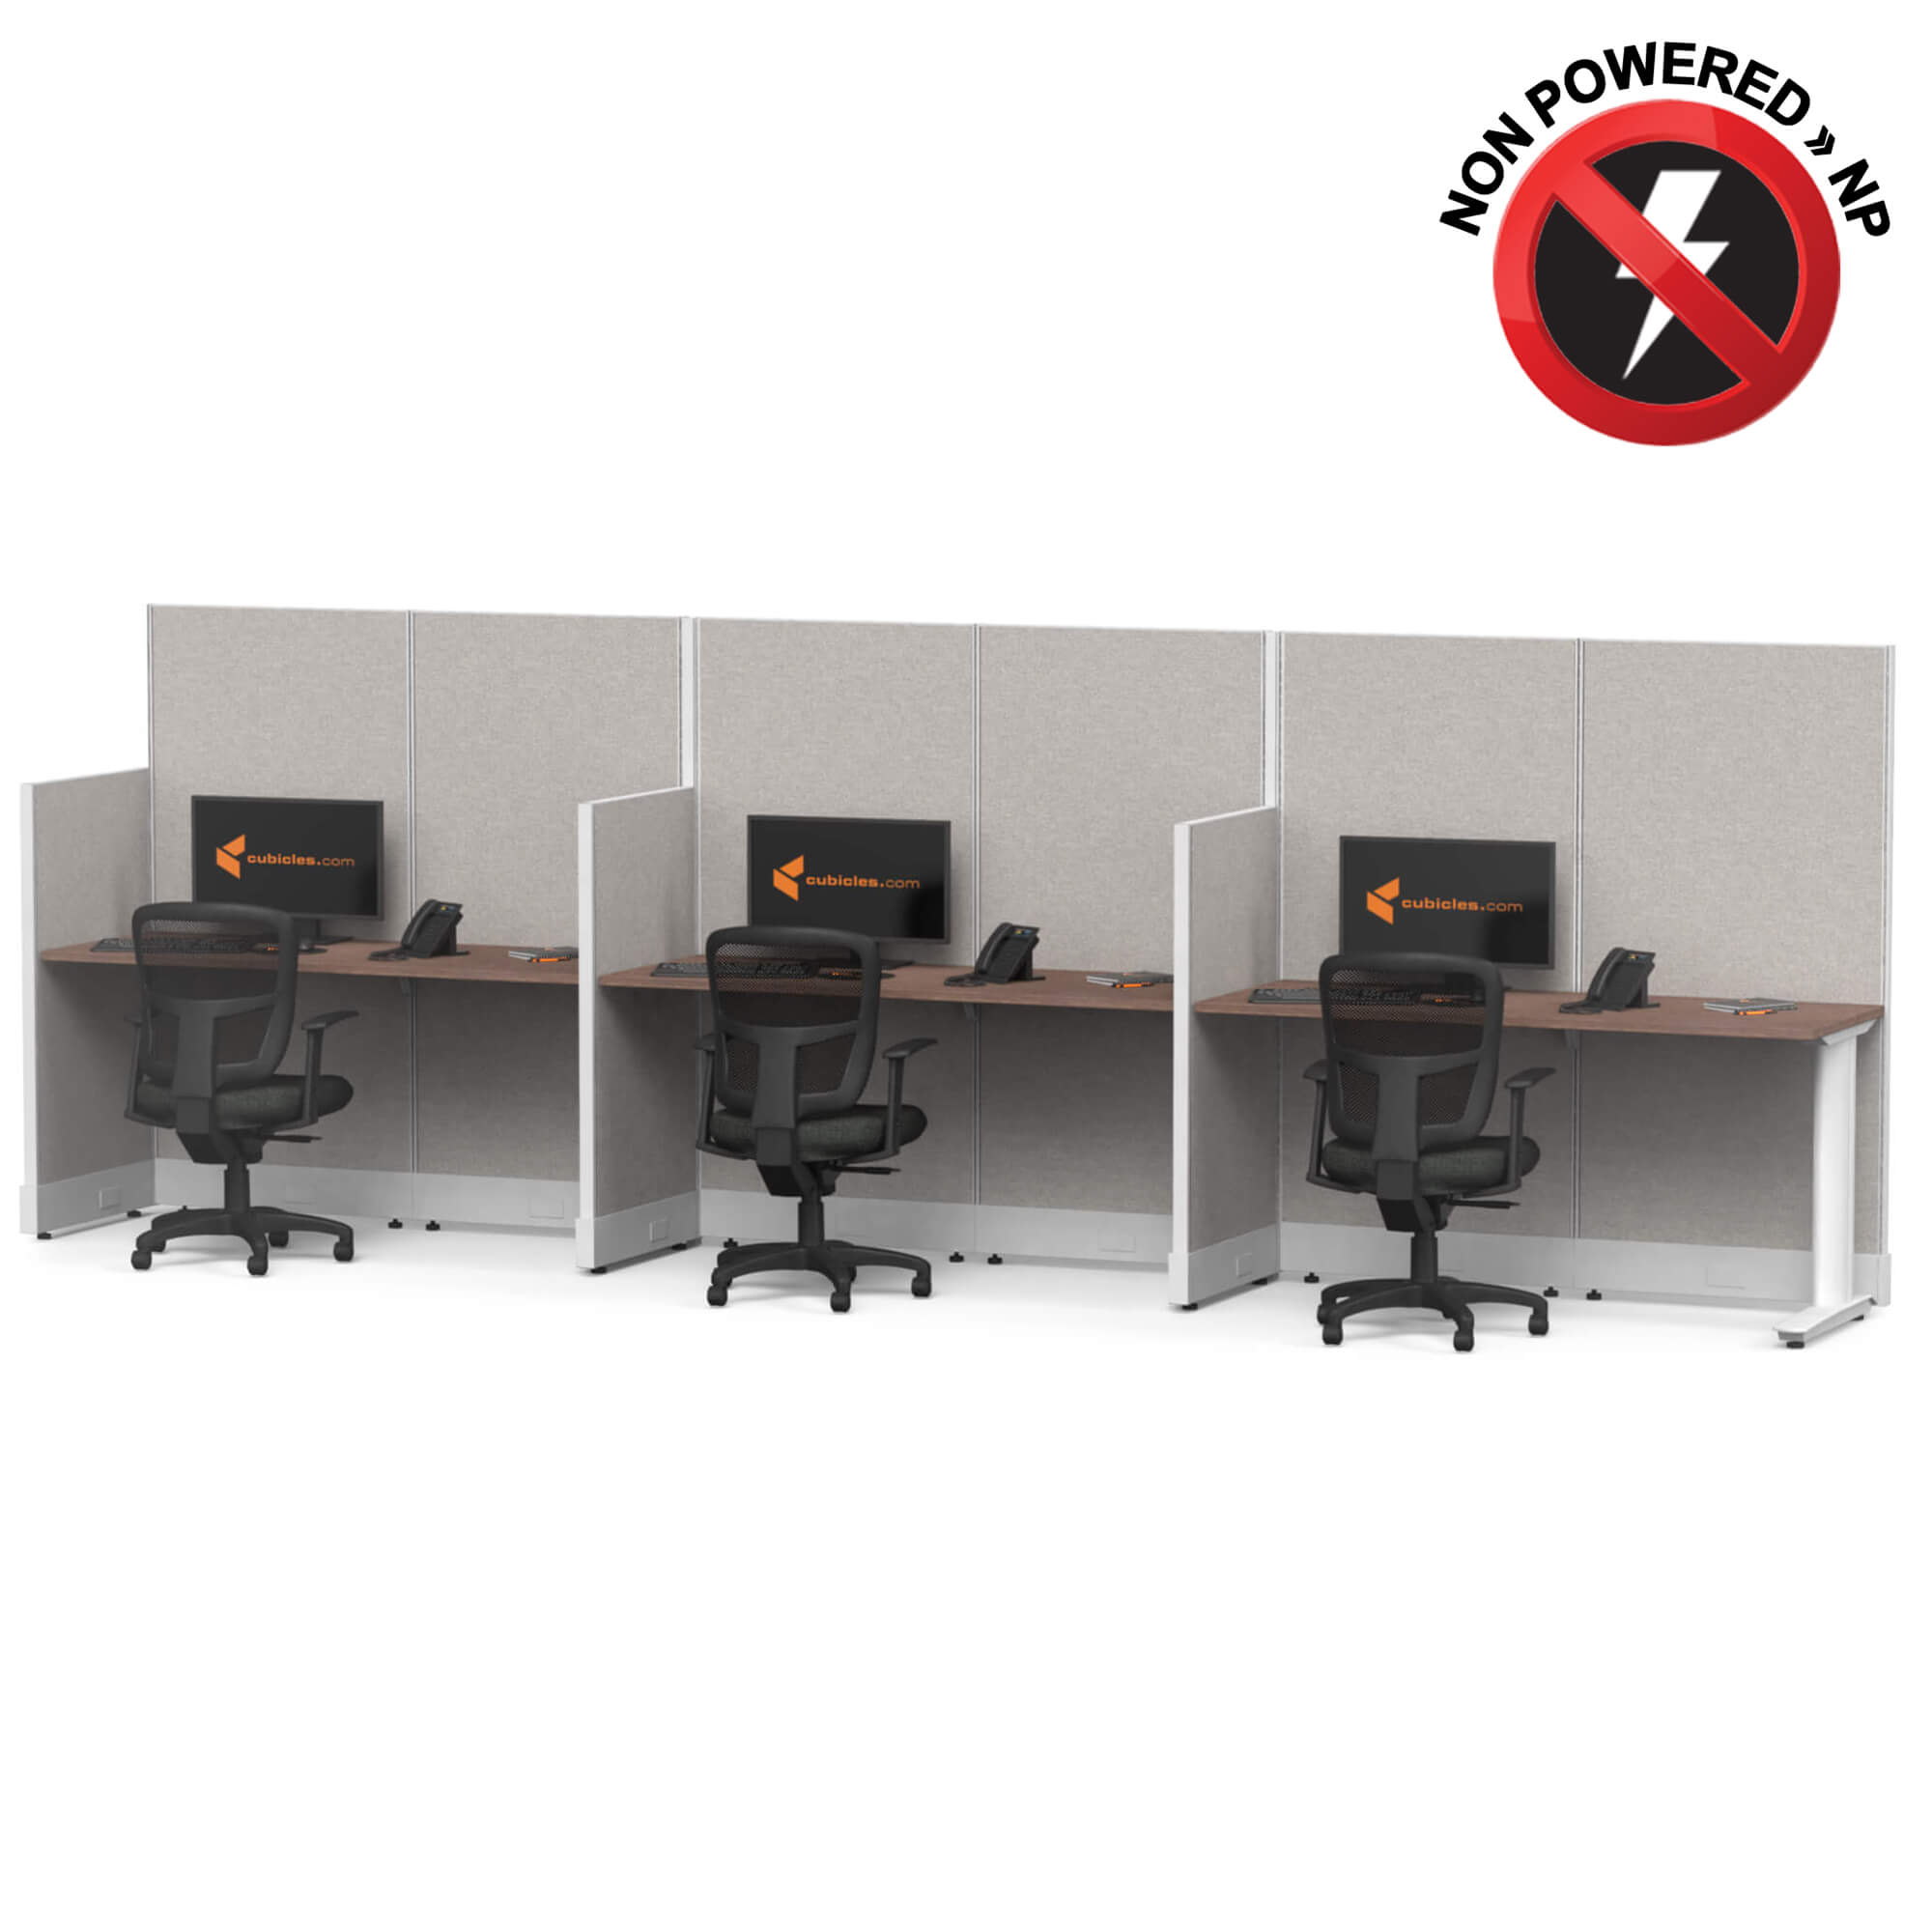 cubicle-desk-straight-workstation-3pack-inline-non-powered-sign-1-2.jpg